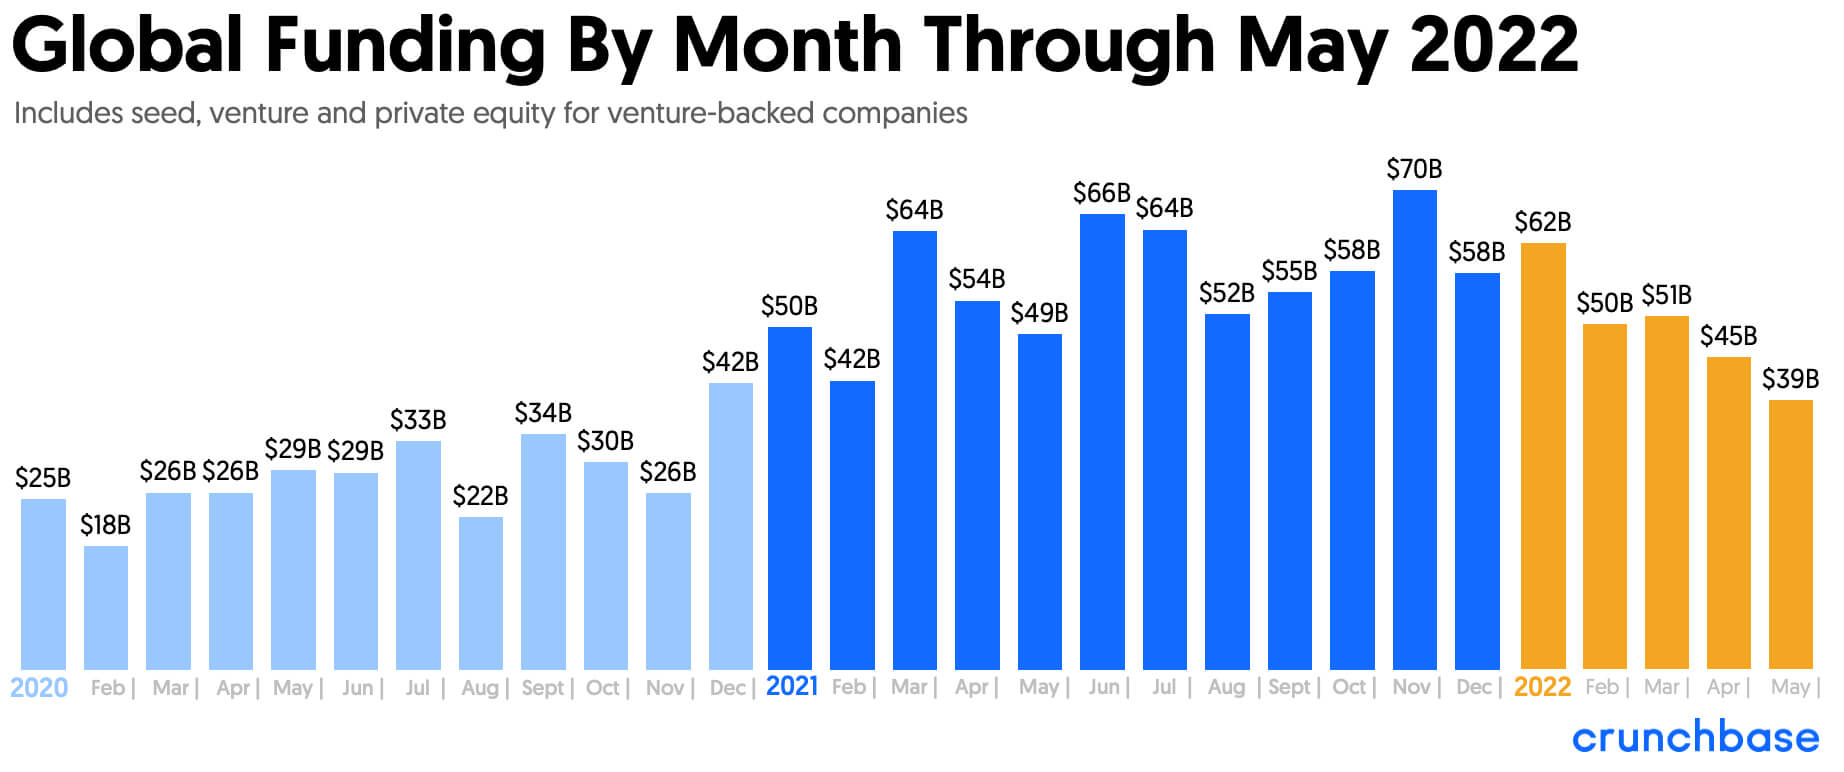 global funding by month through may 2022